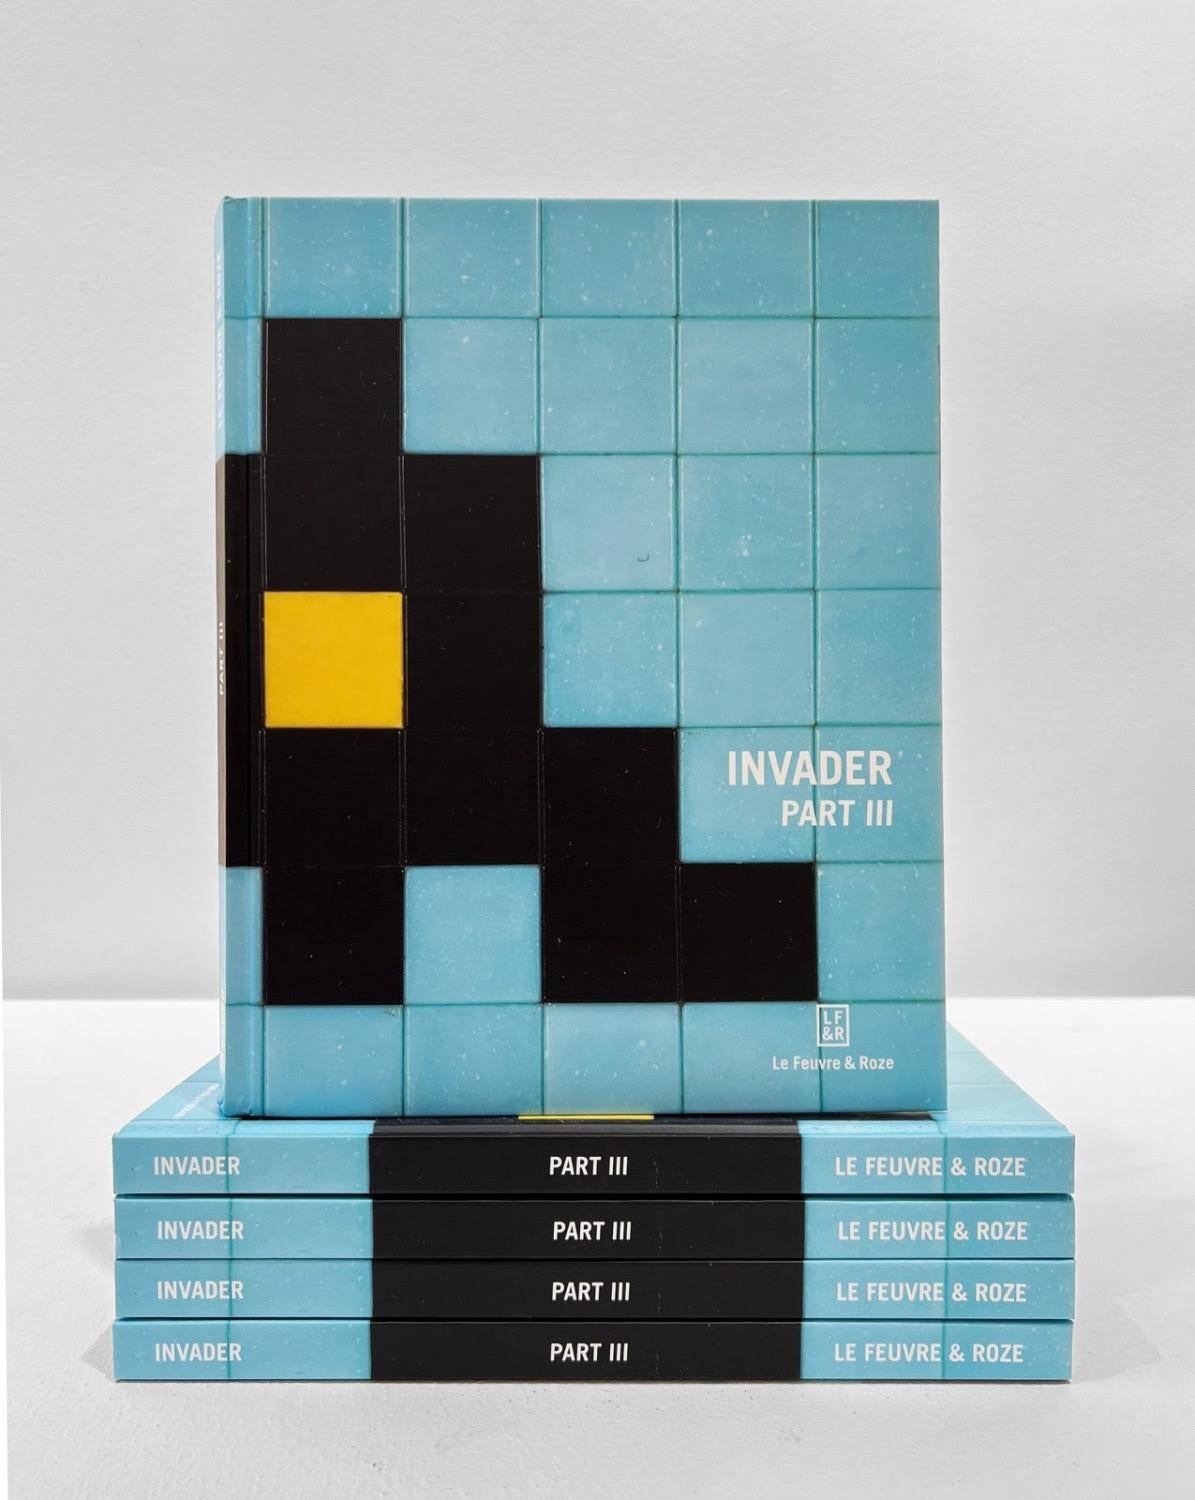 Invader, Invader (Part 3) Book, 2022
 
Official catalogue from the Invader show at Le Feuvre & Roze in Paris

Edition: 1500

Format: Hardcover

Text: French and English

Edition: Le Feuvre & Roze

Size: 21.0 cm (w) x 27.0 cm (h)